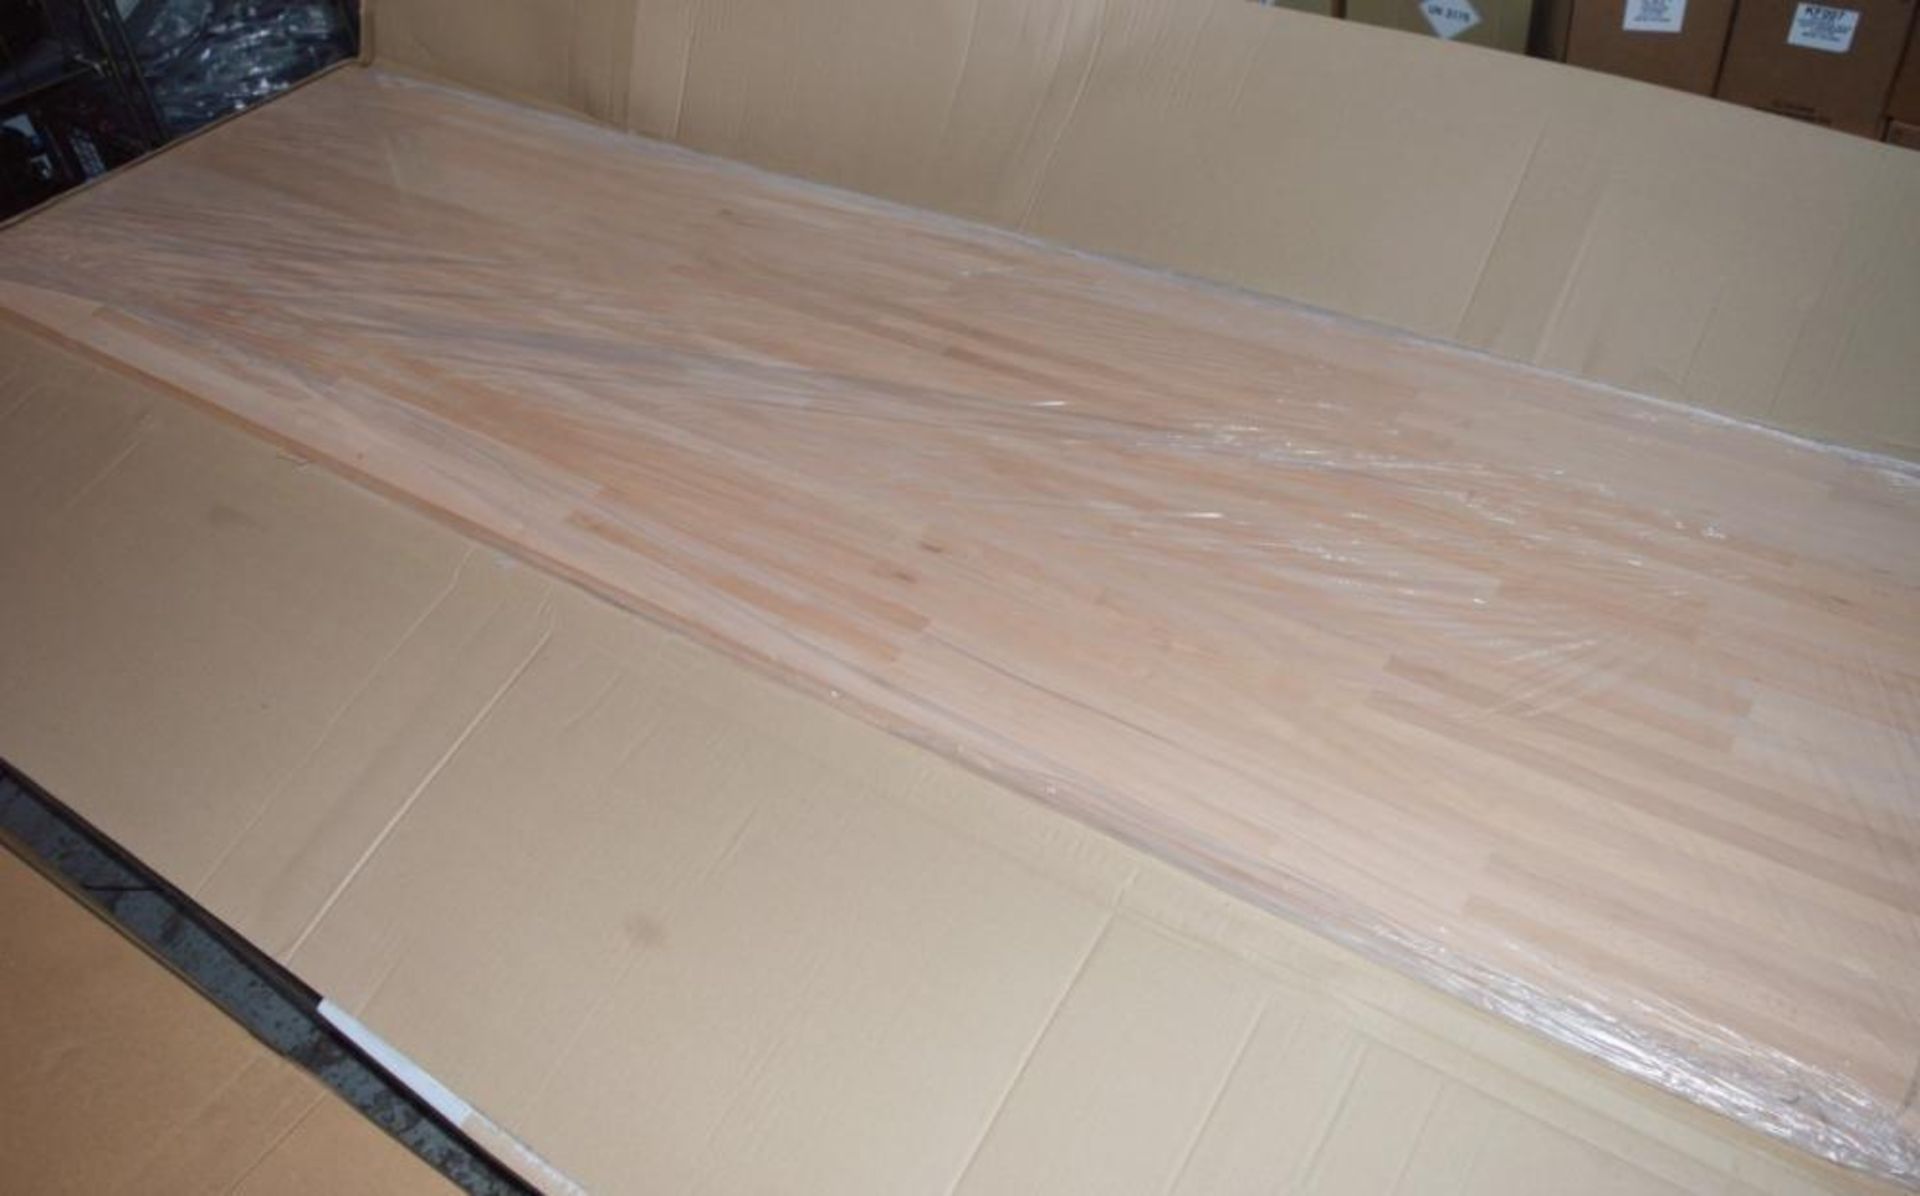 1 x Solid Wood Kitchen Worktop - PRIME BEECH - First Grade Finger Jointed Kitchen Worktop - Size: - Image 3 of 4